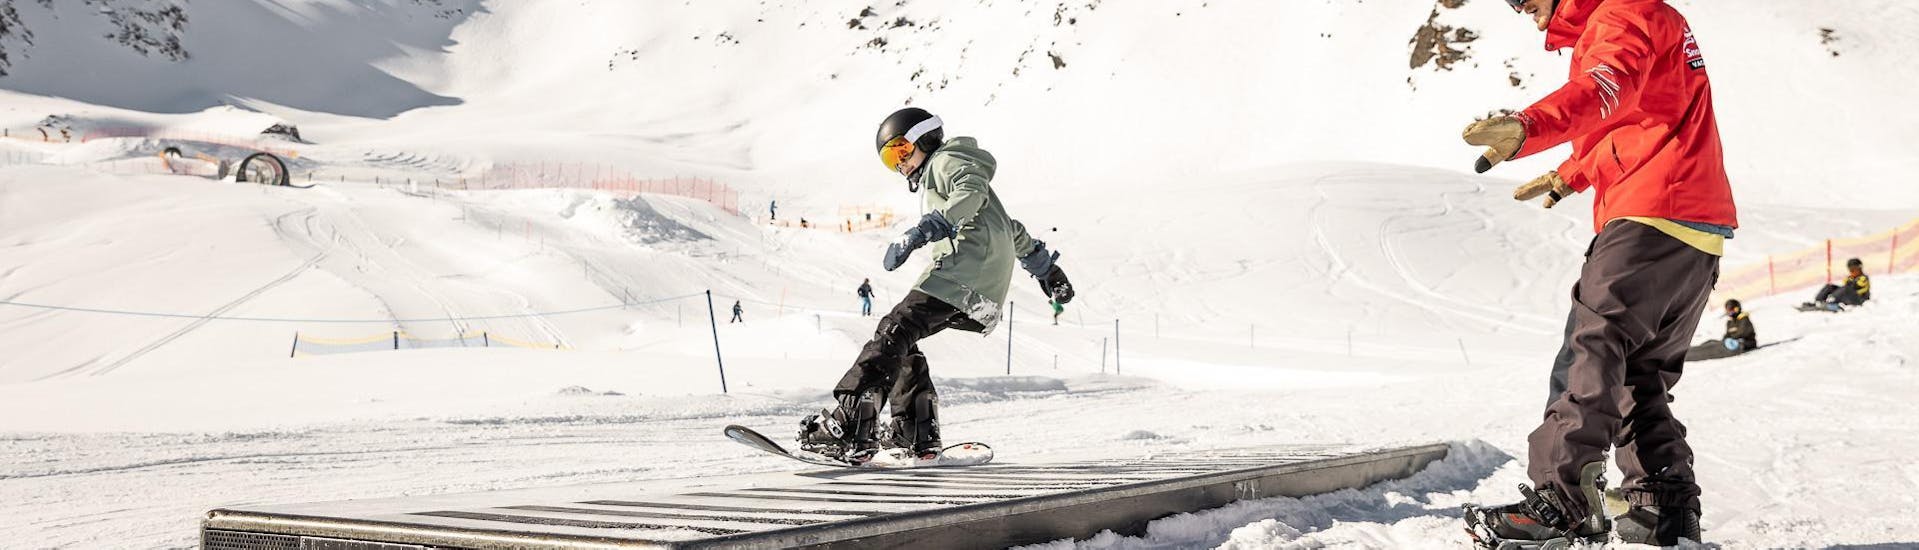 A young snowboarder is practicing new tricks during his Private Snowboarding Lessons for Kids - All Levels with the ski school Ski- und Snowboardschule Vacancia.